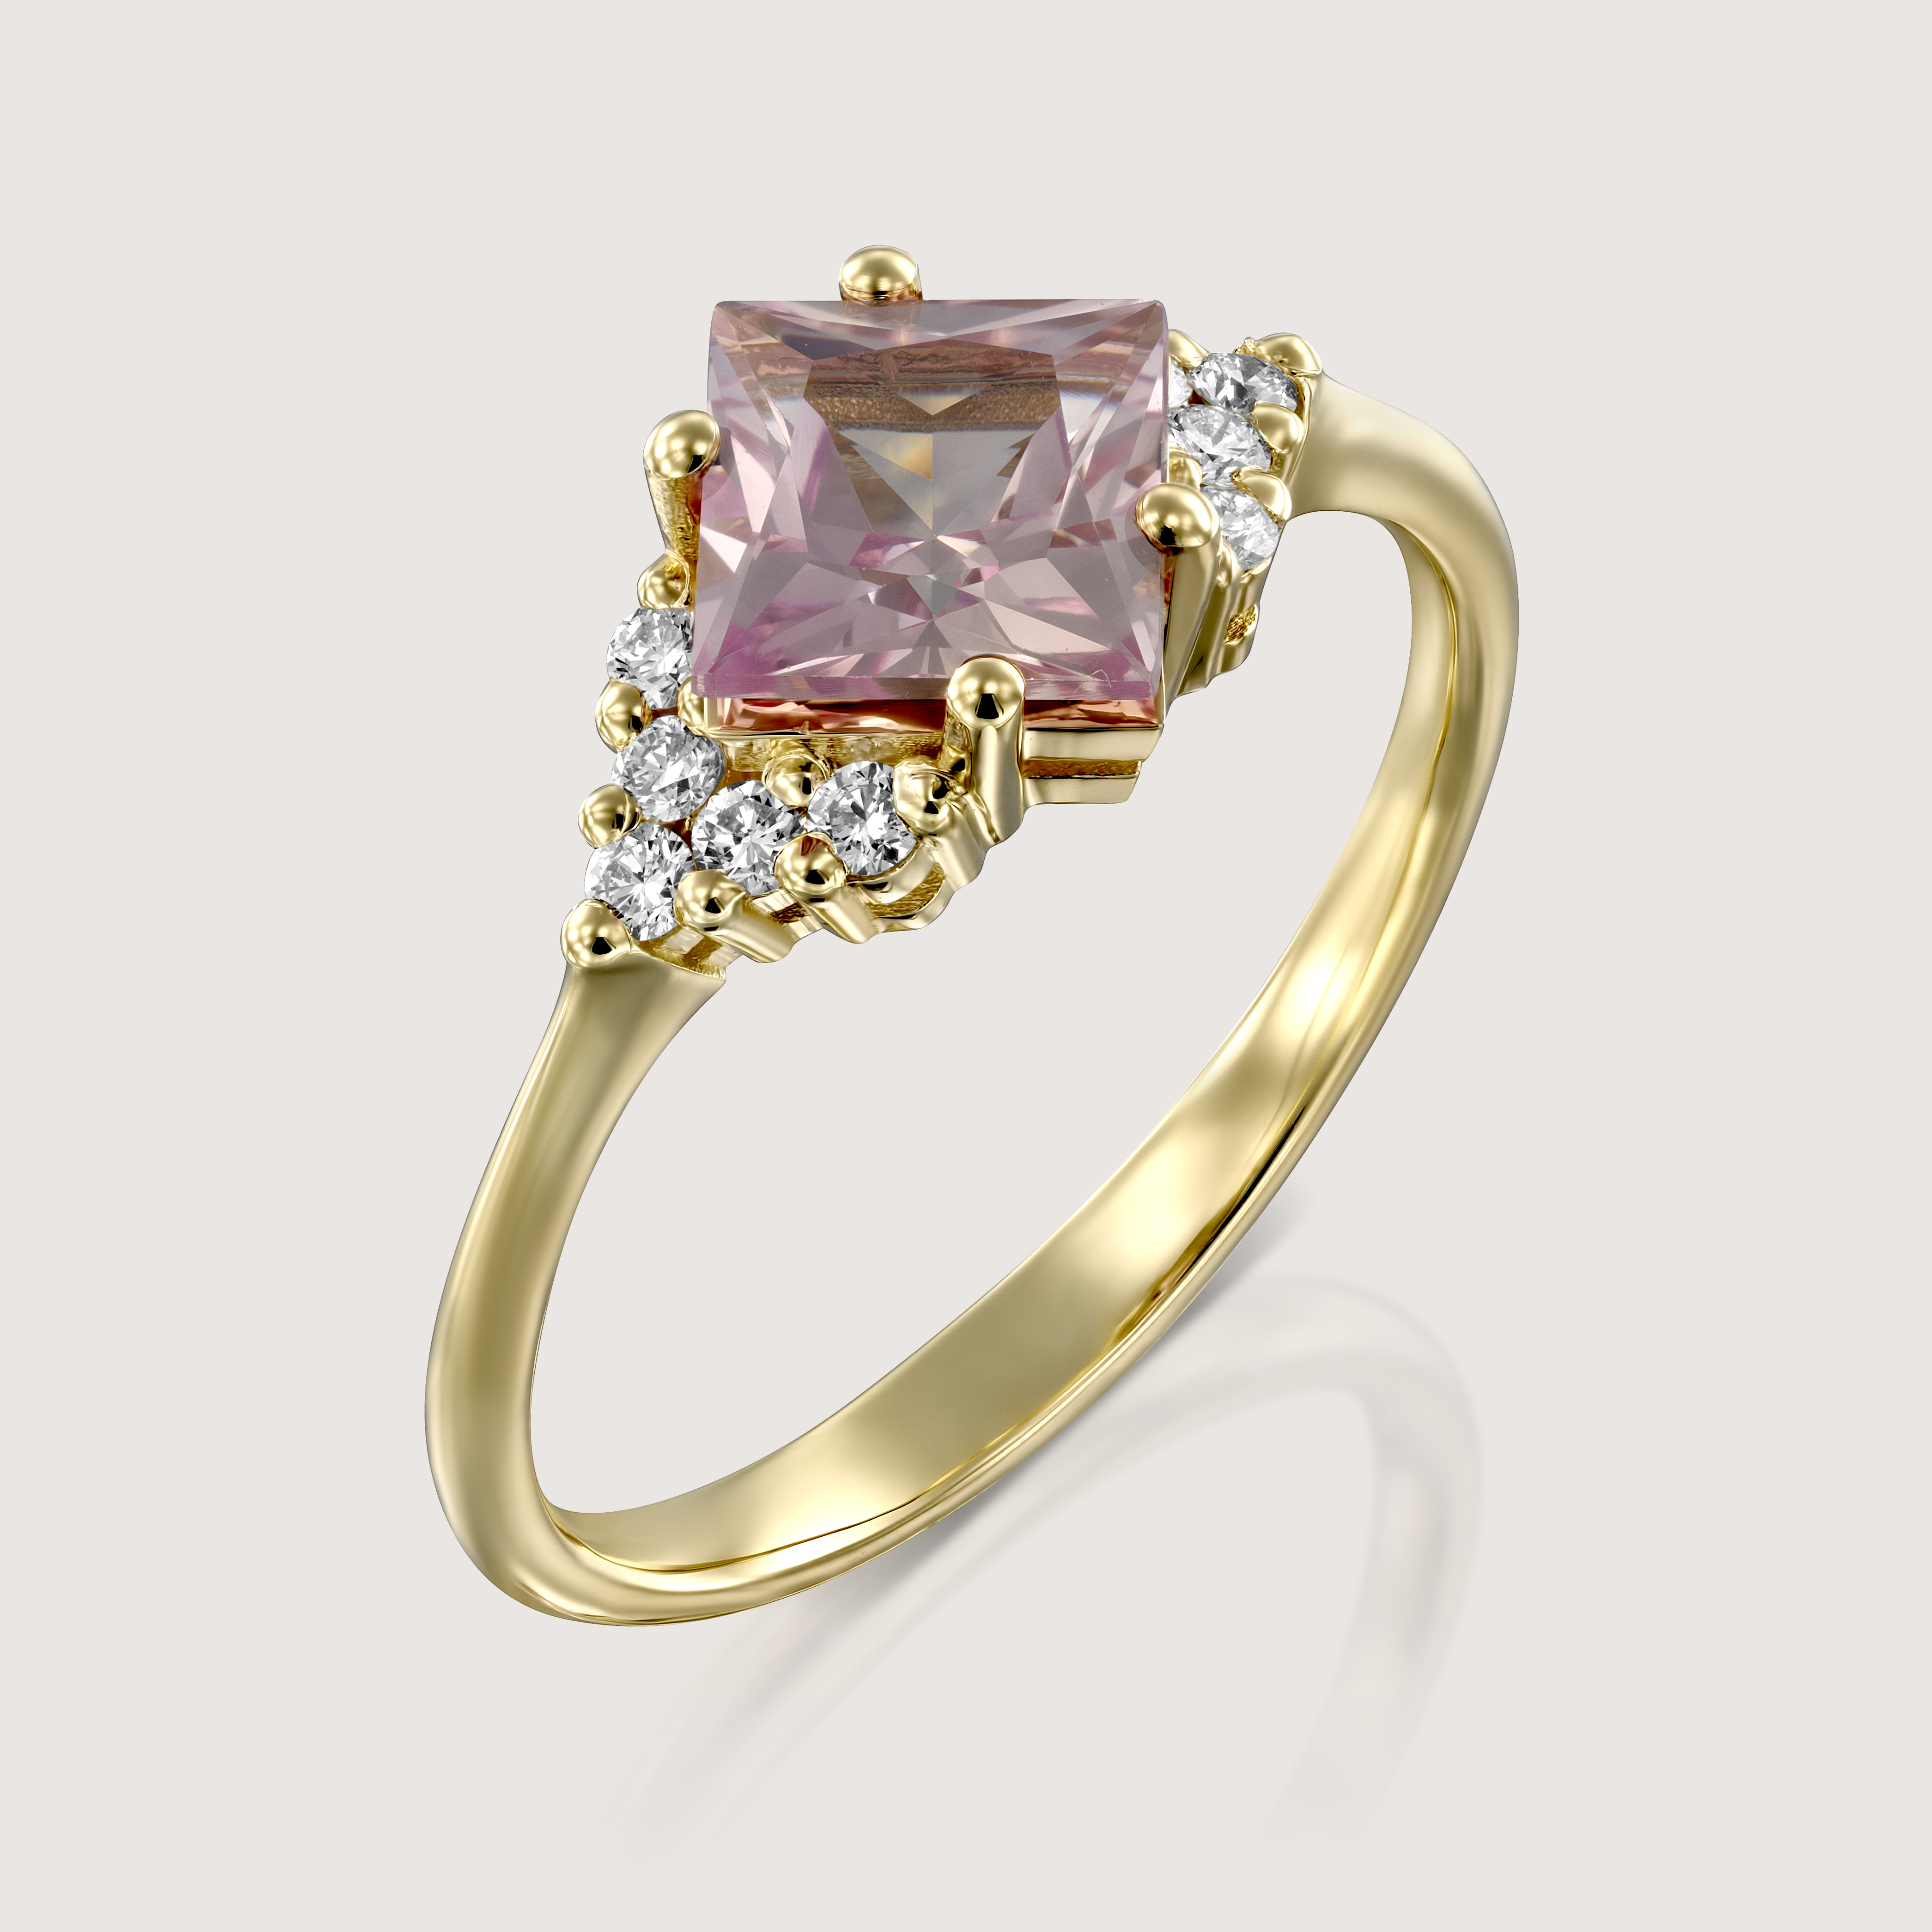 Juliette Ring With Diamonds and Morganite